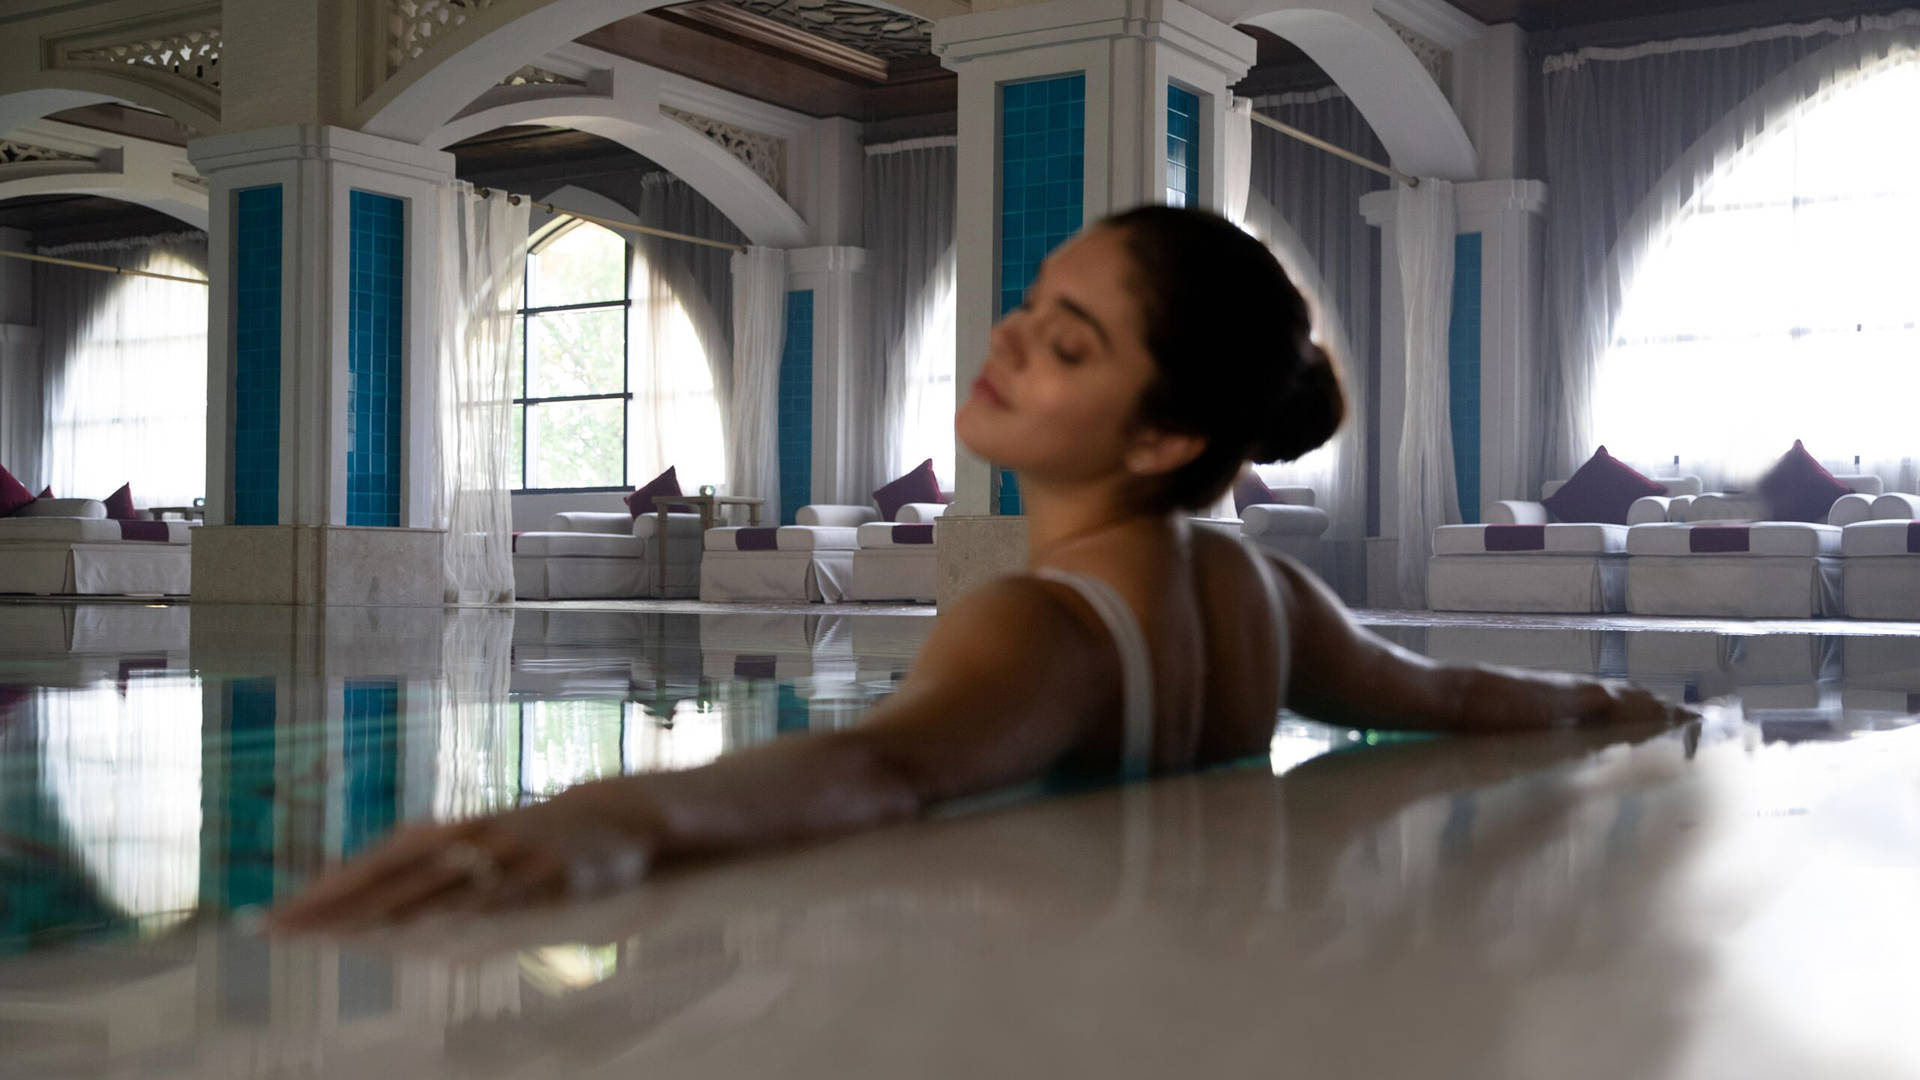 A woman relaxing in a Thalassotheraphy pool